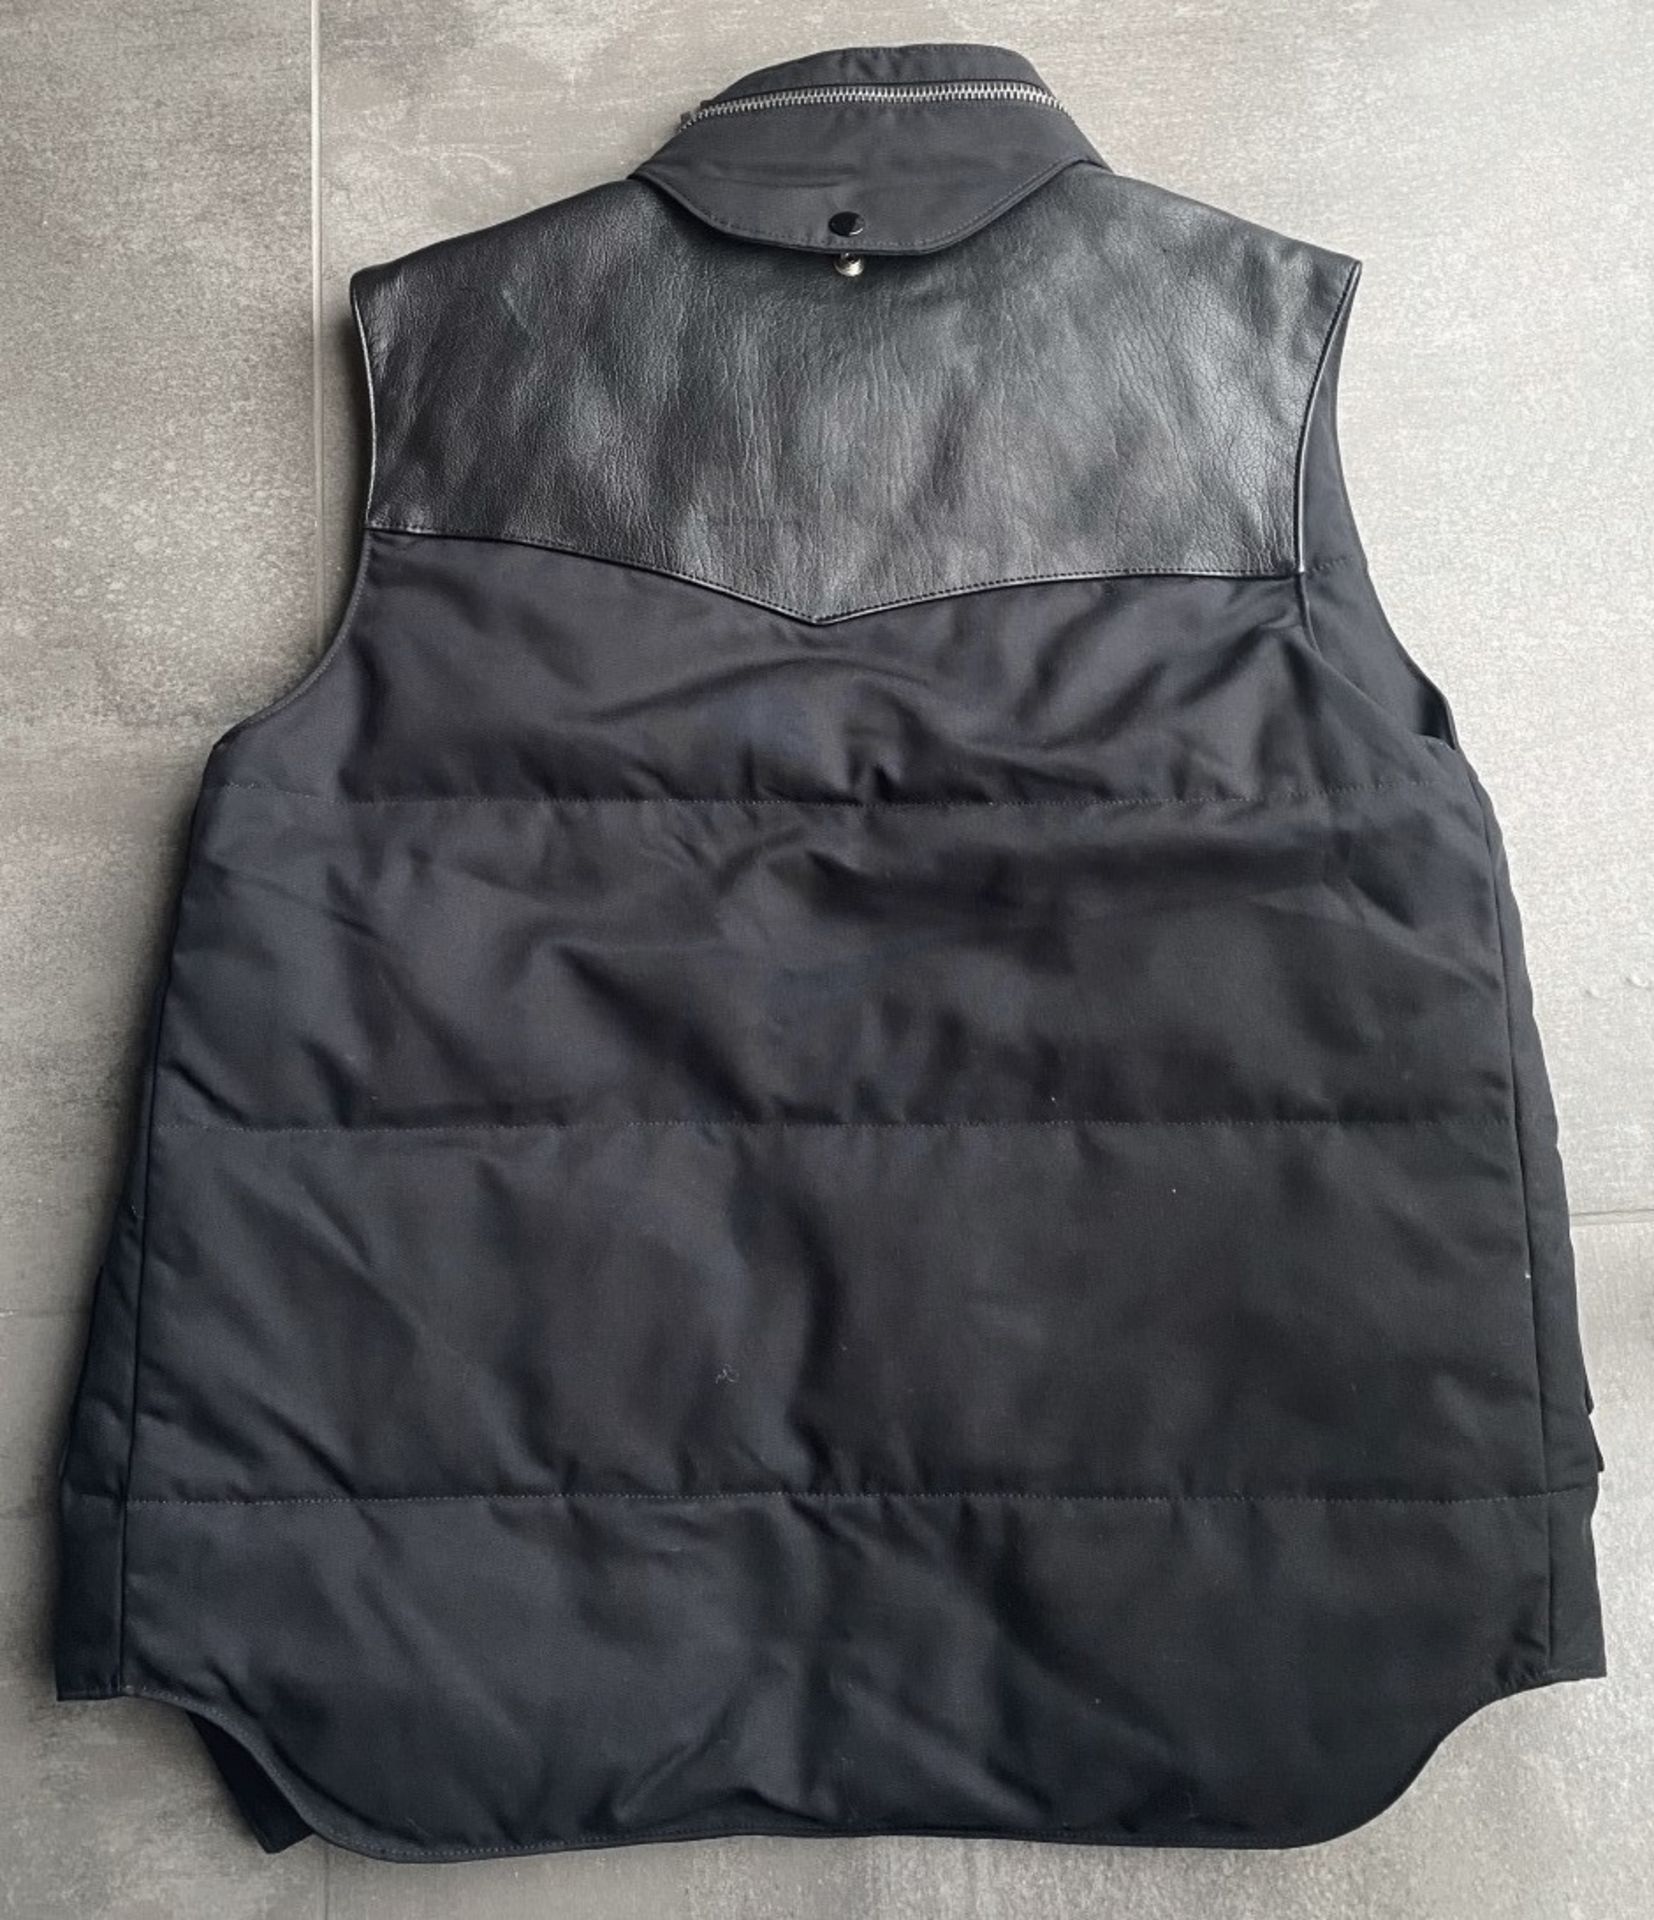 1 x Men's Genuine Yves Saint Laurant Gillet / Body Warmer In Black With Leather Panelling - Image 6 of 8